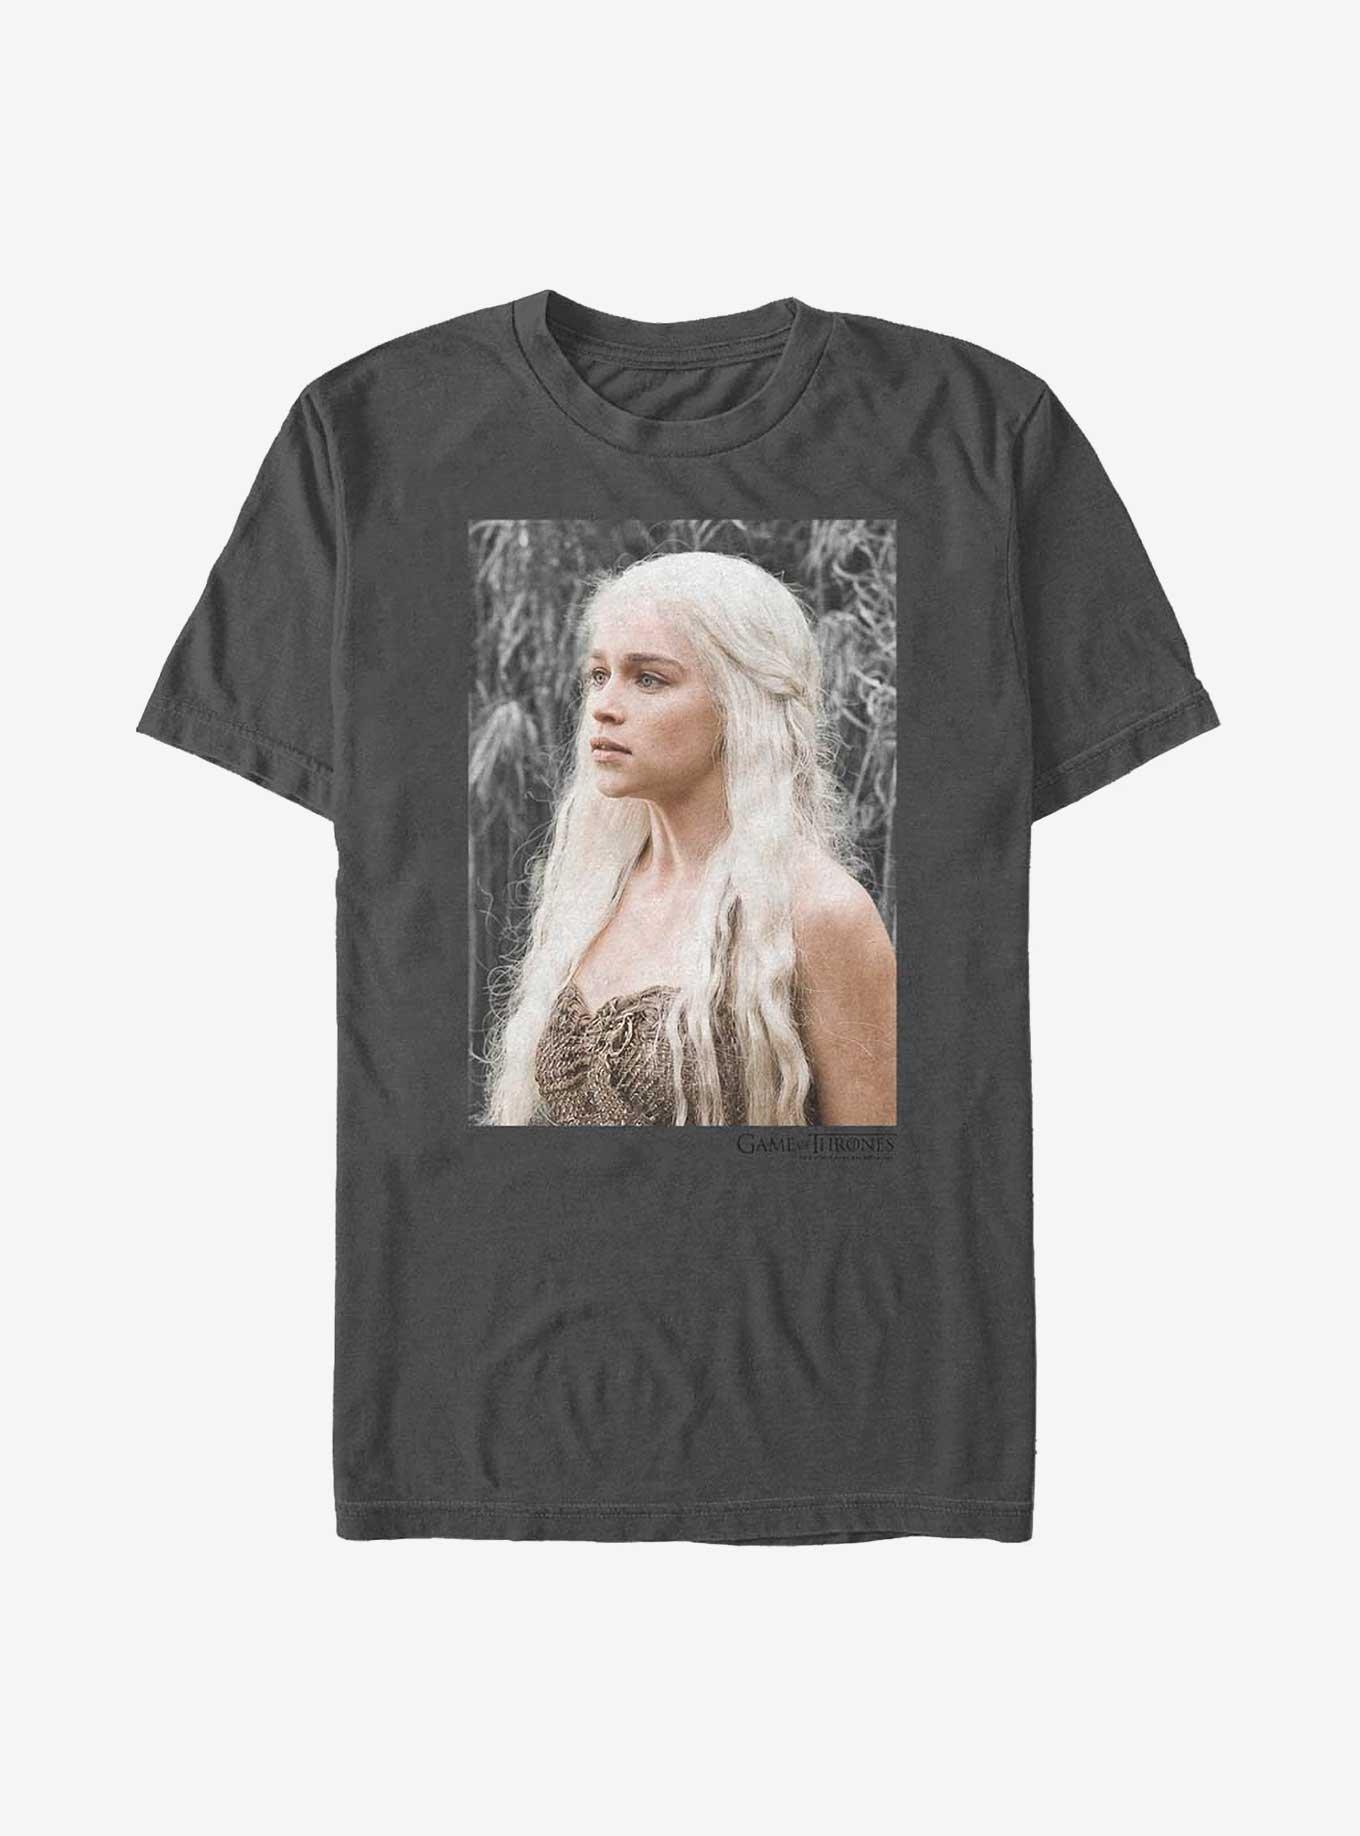 Game Of Thrones Daenerys Portrait T-Shirt, CHARCOAL, hi-res